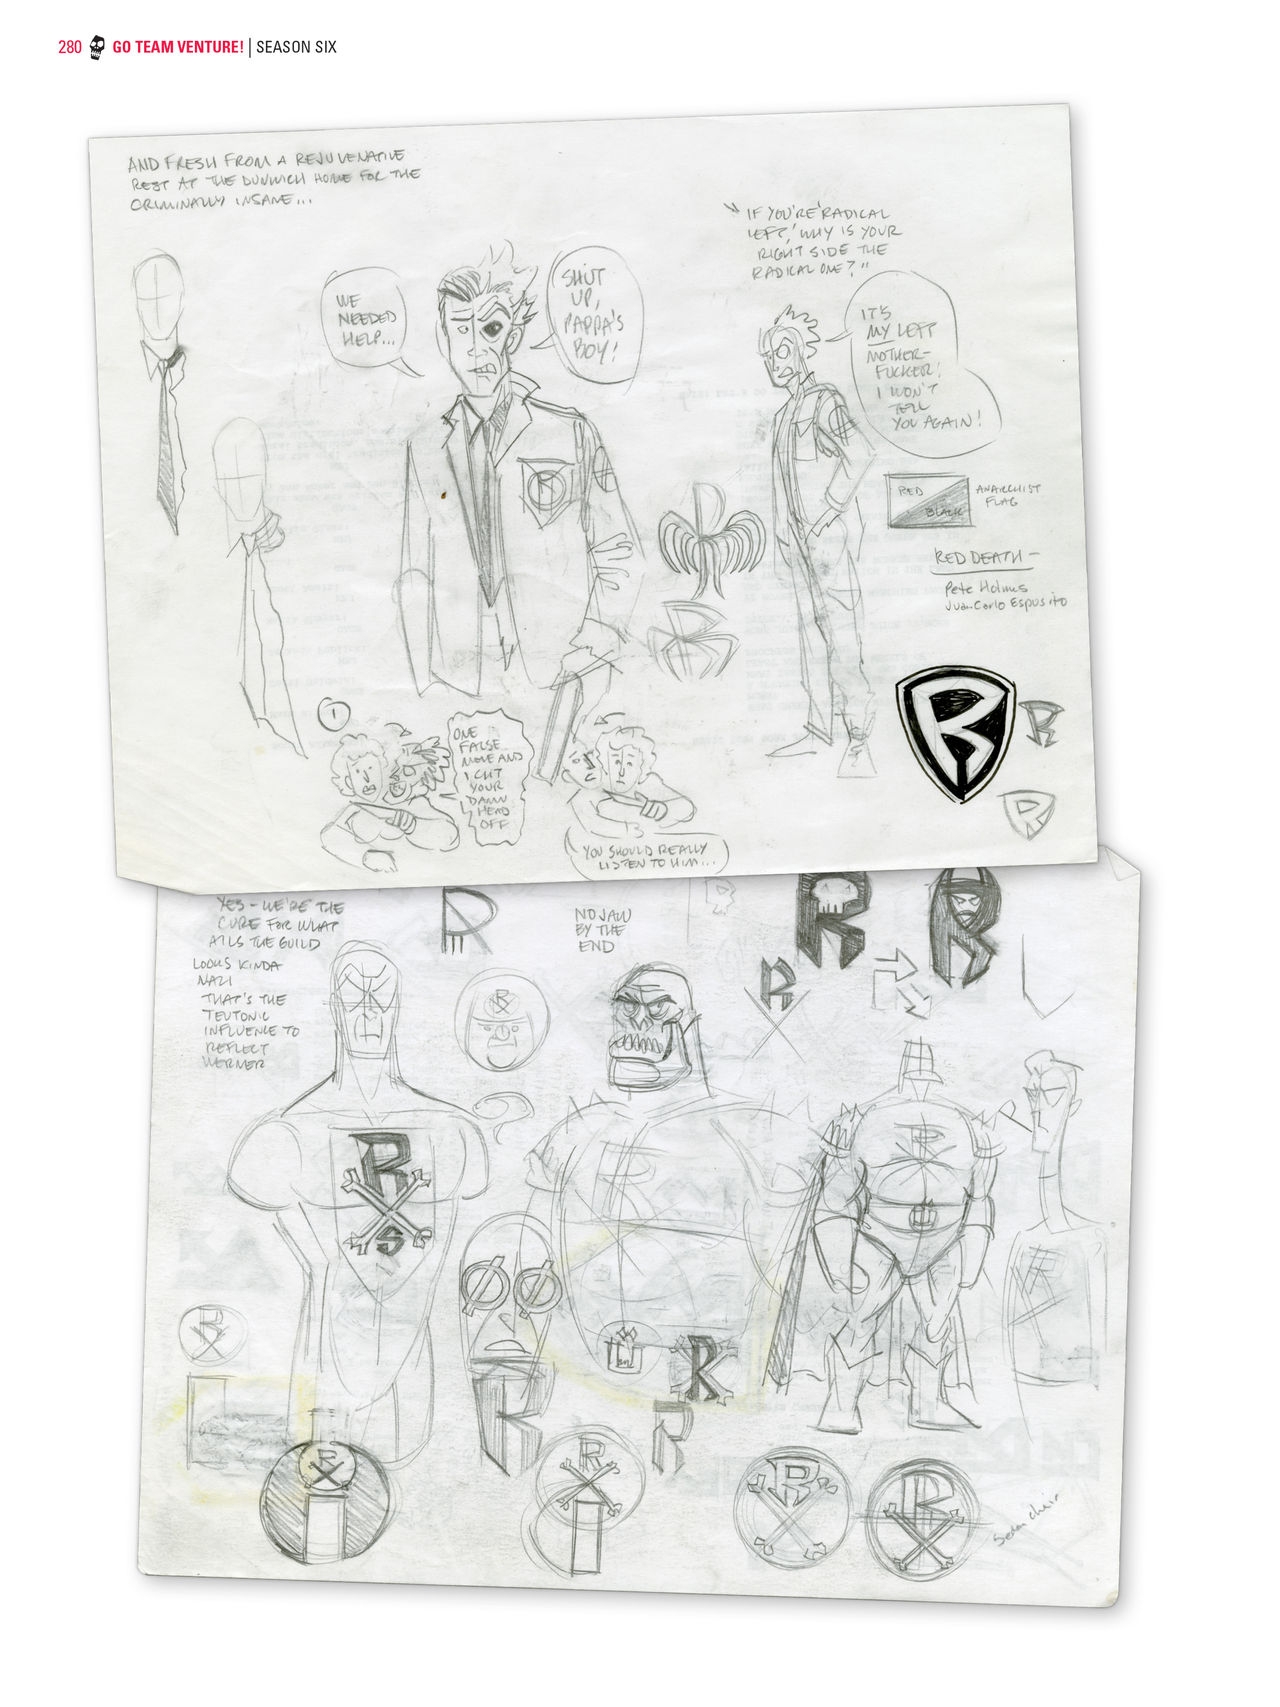 Go Team Venture! - The Art and Making of the Venture Bros 278